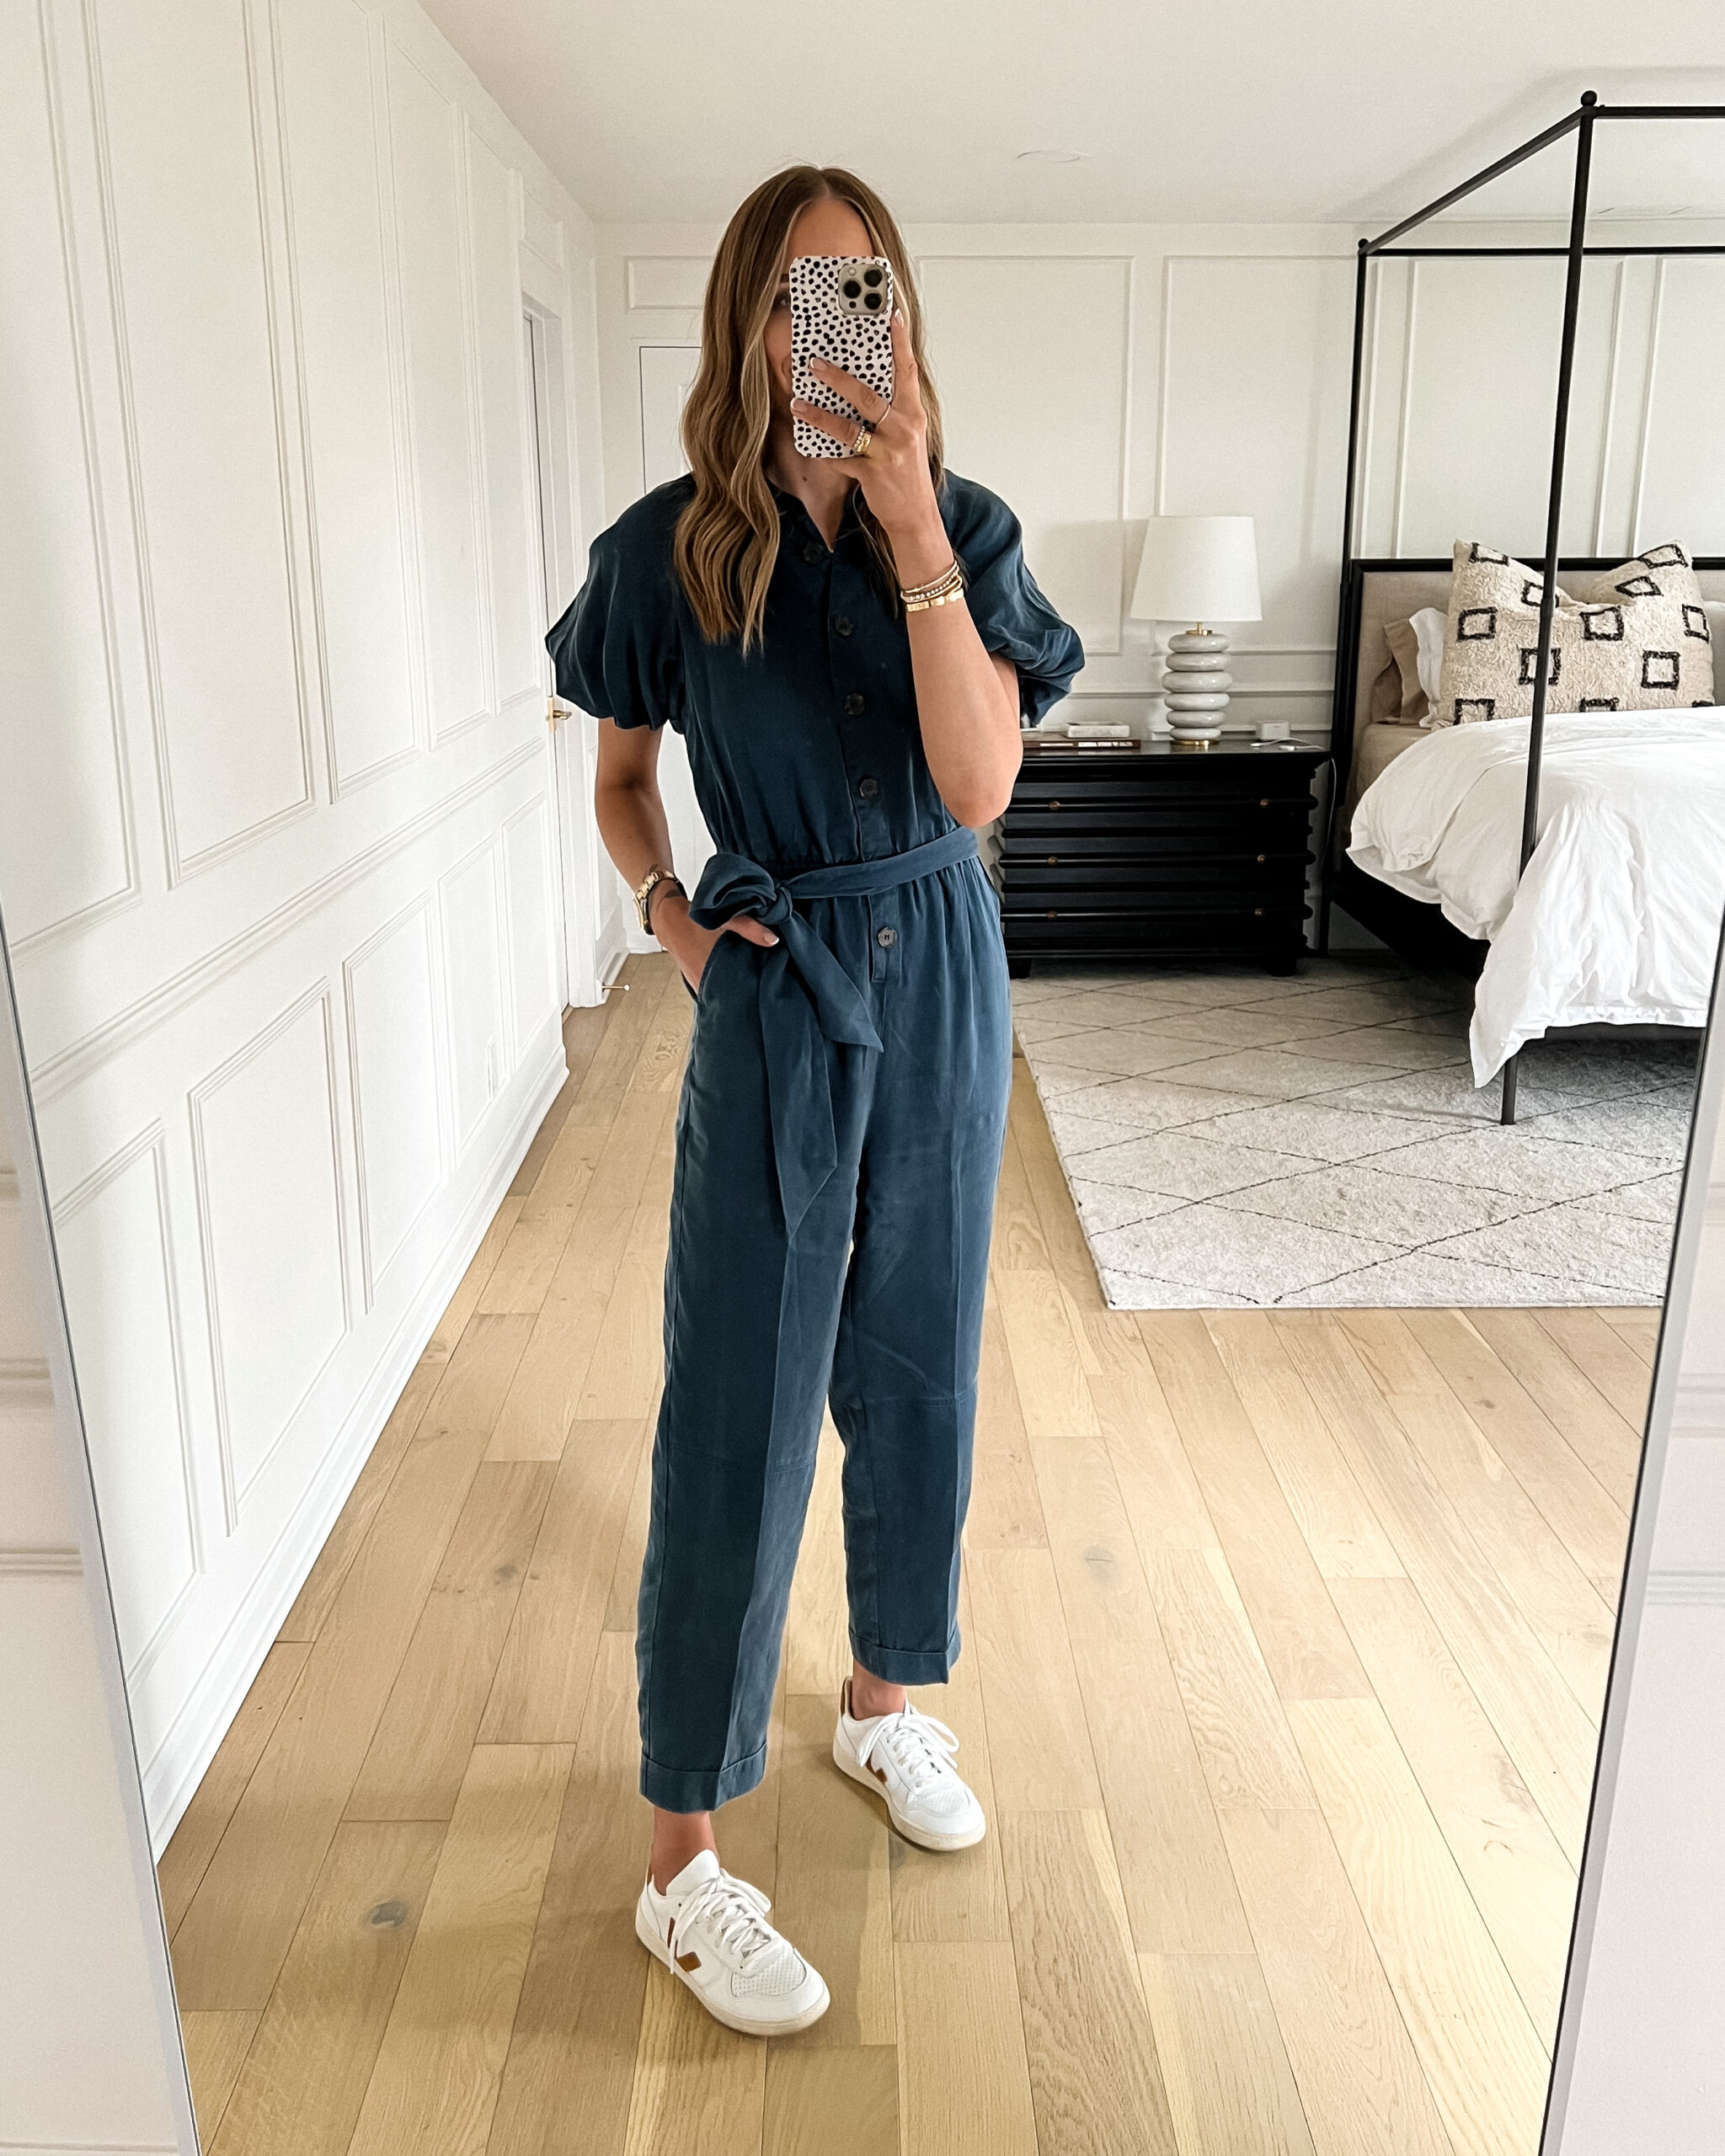 Fashion Jackson Wearing Jcrew Navy Jumpsuit Veja Sneakers Spring Outfit